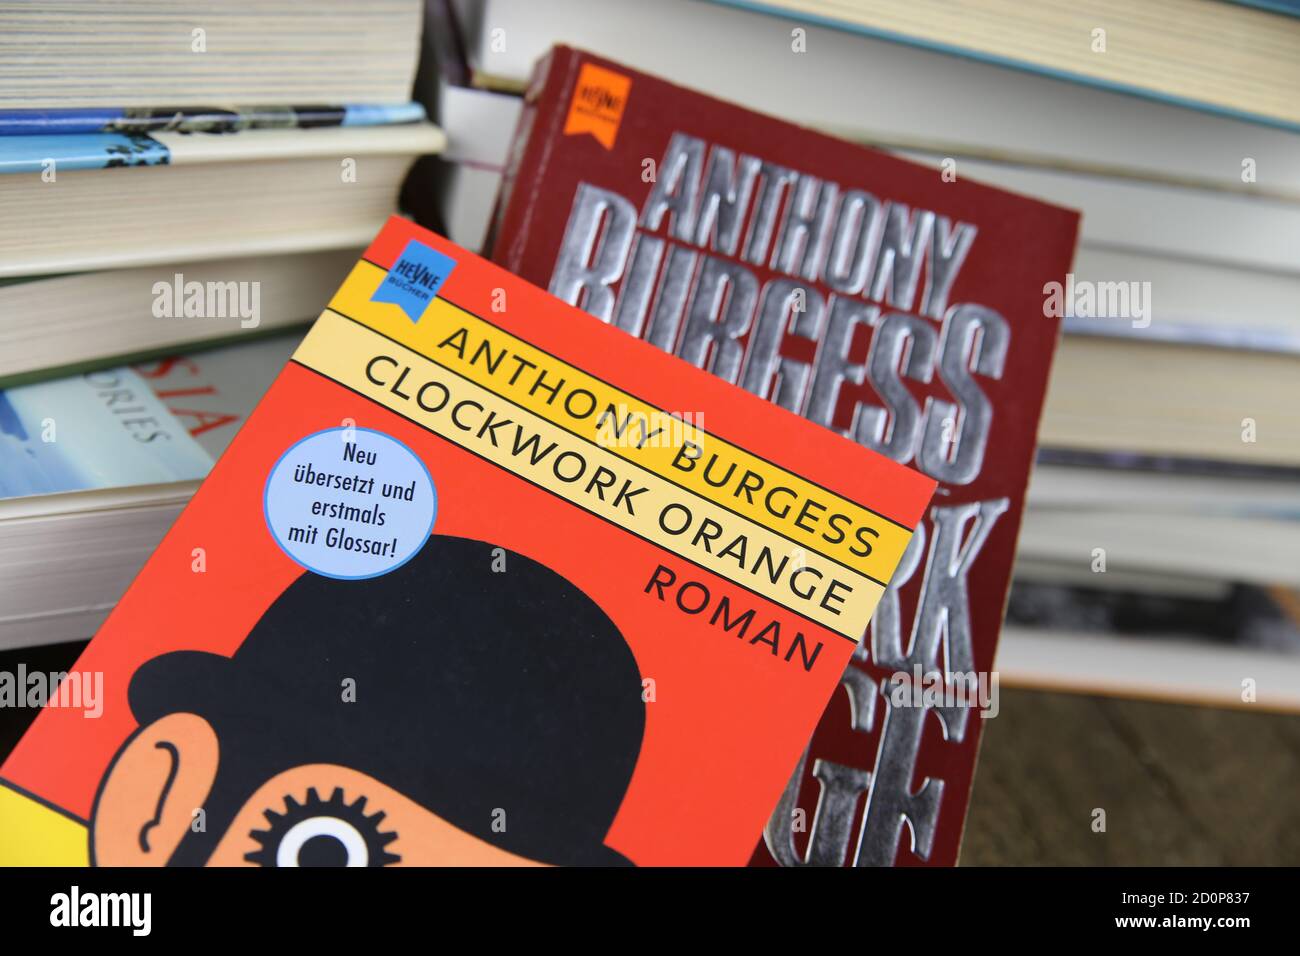 Viersen, Germany - May 9. 2020: View on isolated  book covers of Anthony Burgess clockwork orange with pile of books background Stock Photo